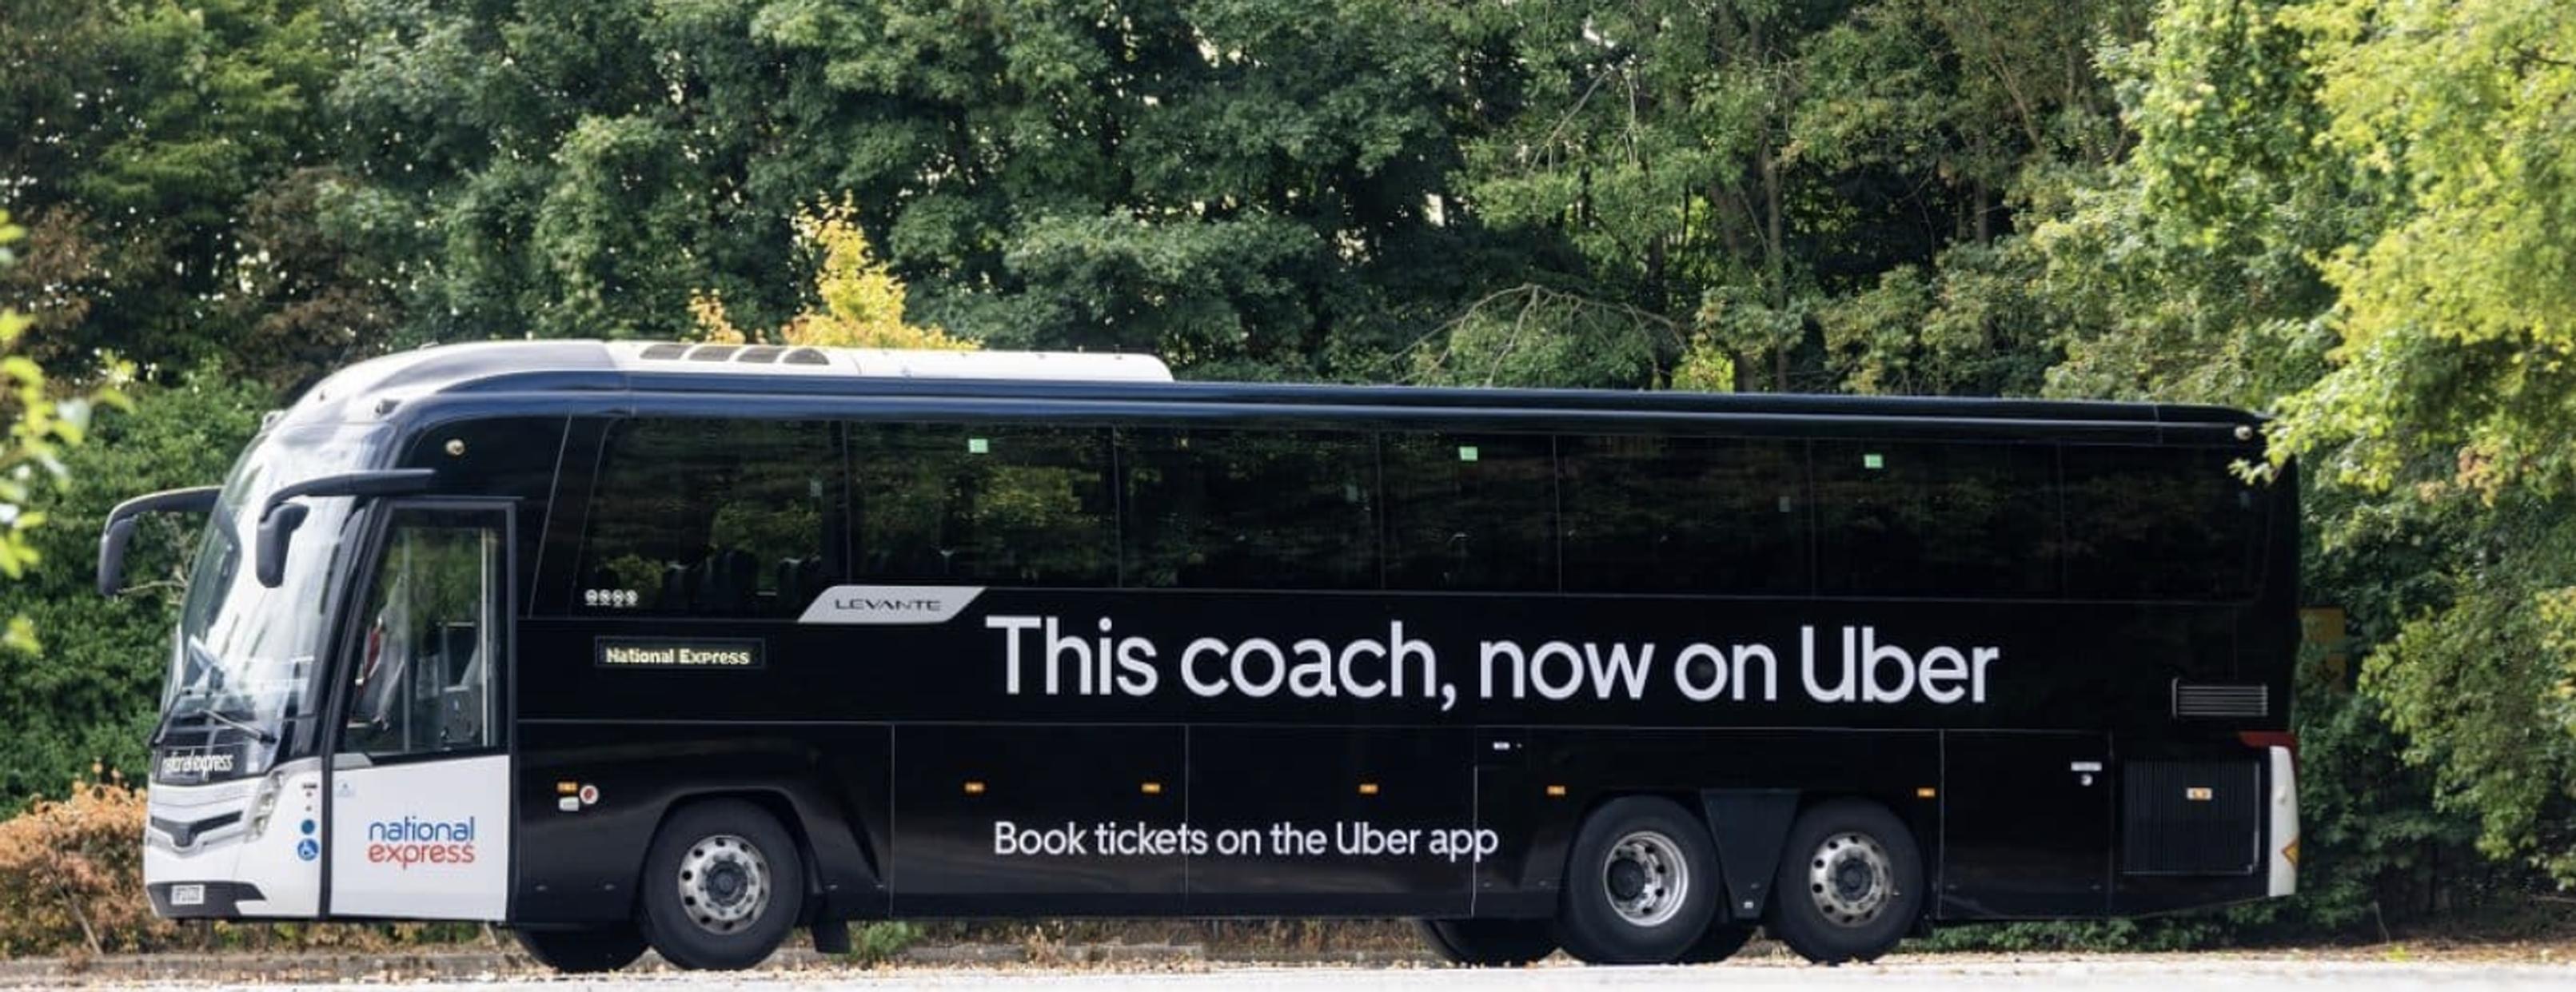 To mark its partnership with Uber, National Express has wrapped one of its own coaches in a black livery. 26 more are scheduled to receive Uber wraps in the next few weeks